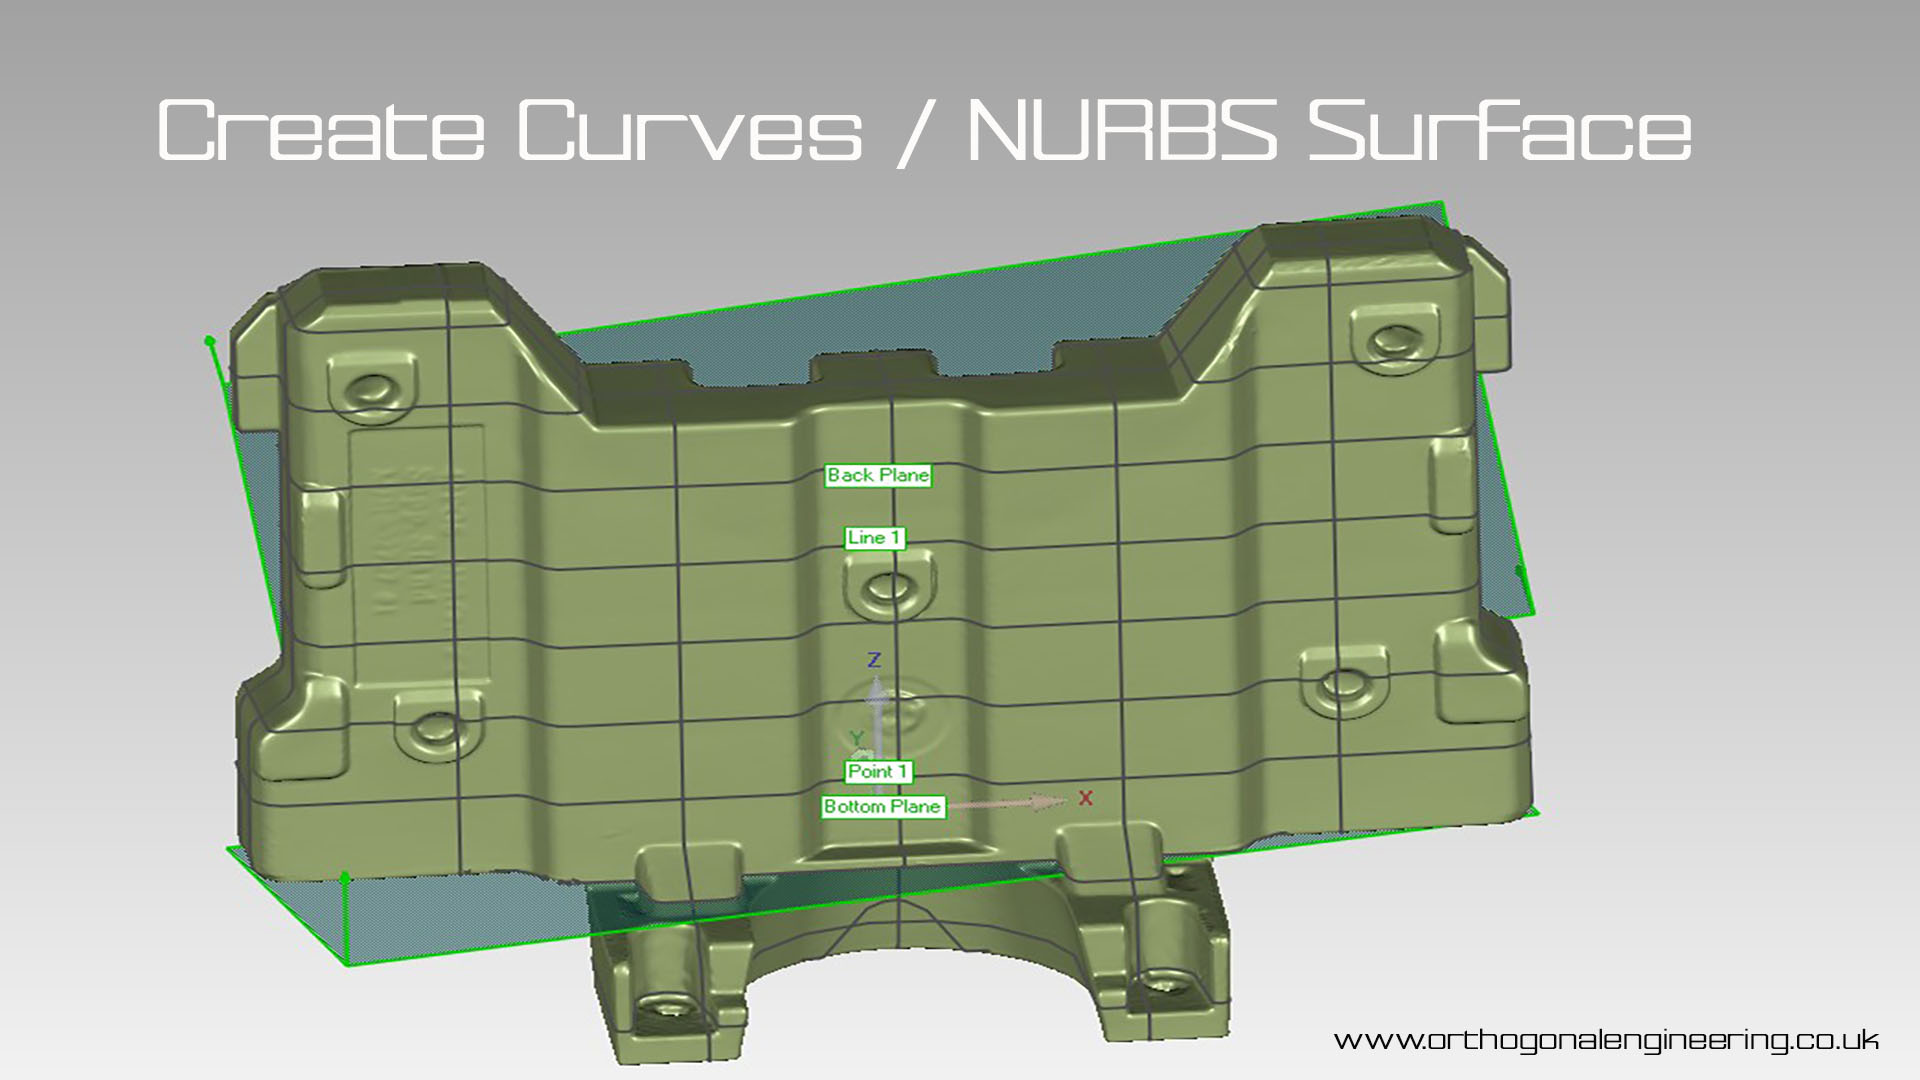 bracket image created from autosurfacing the scanned image to create a NURBS surface 3D object